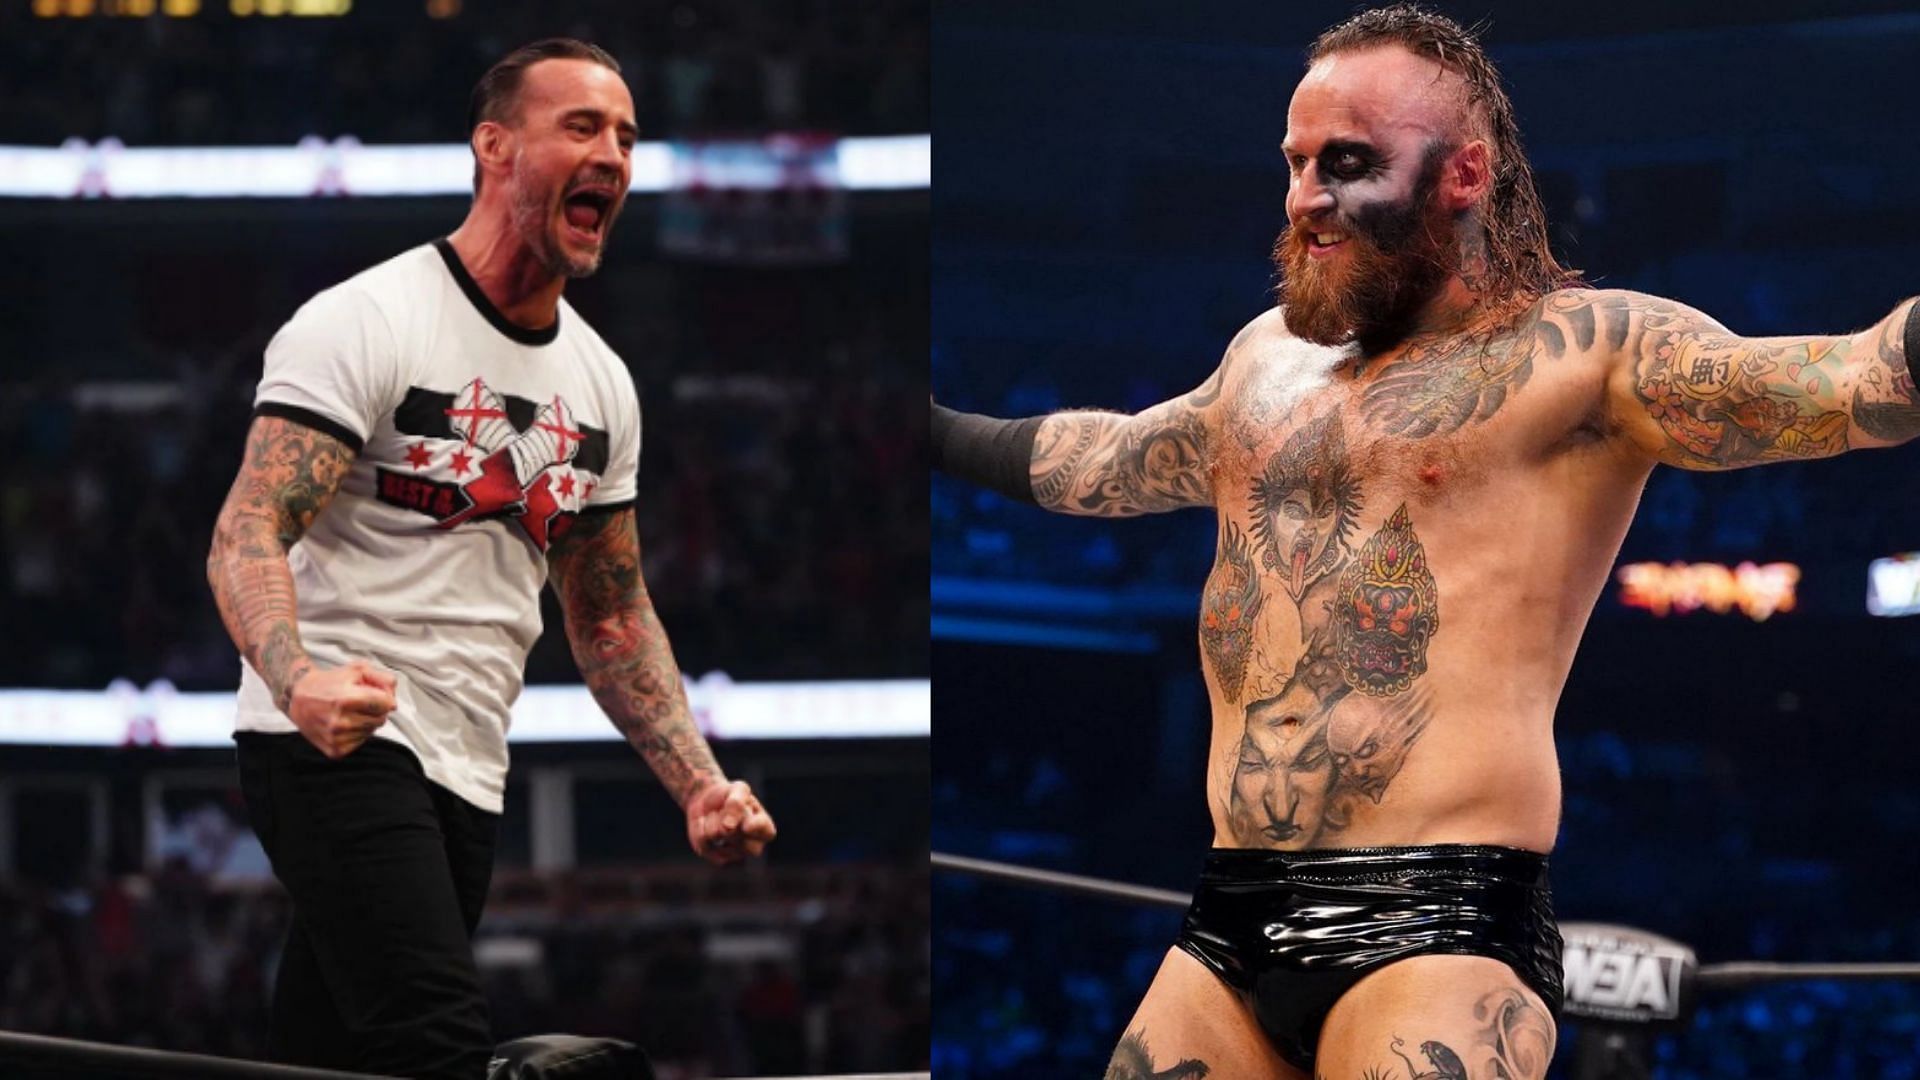 The top news in and around AEW this week